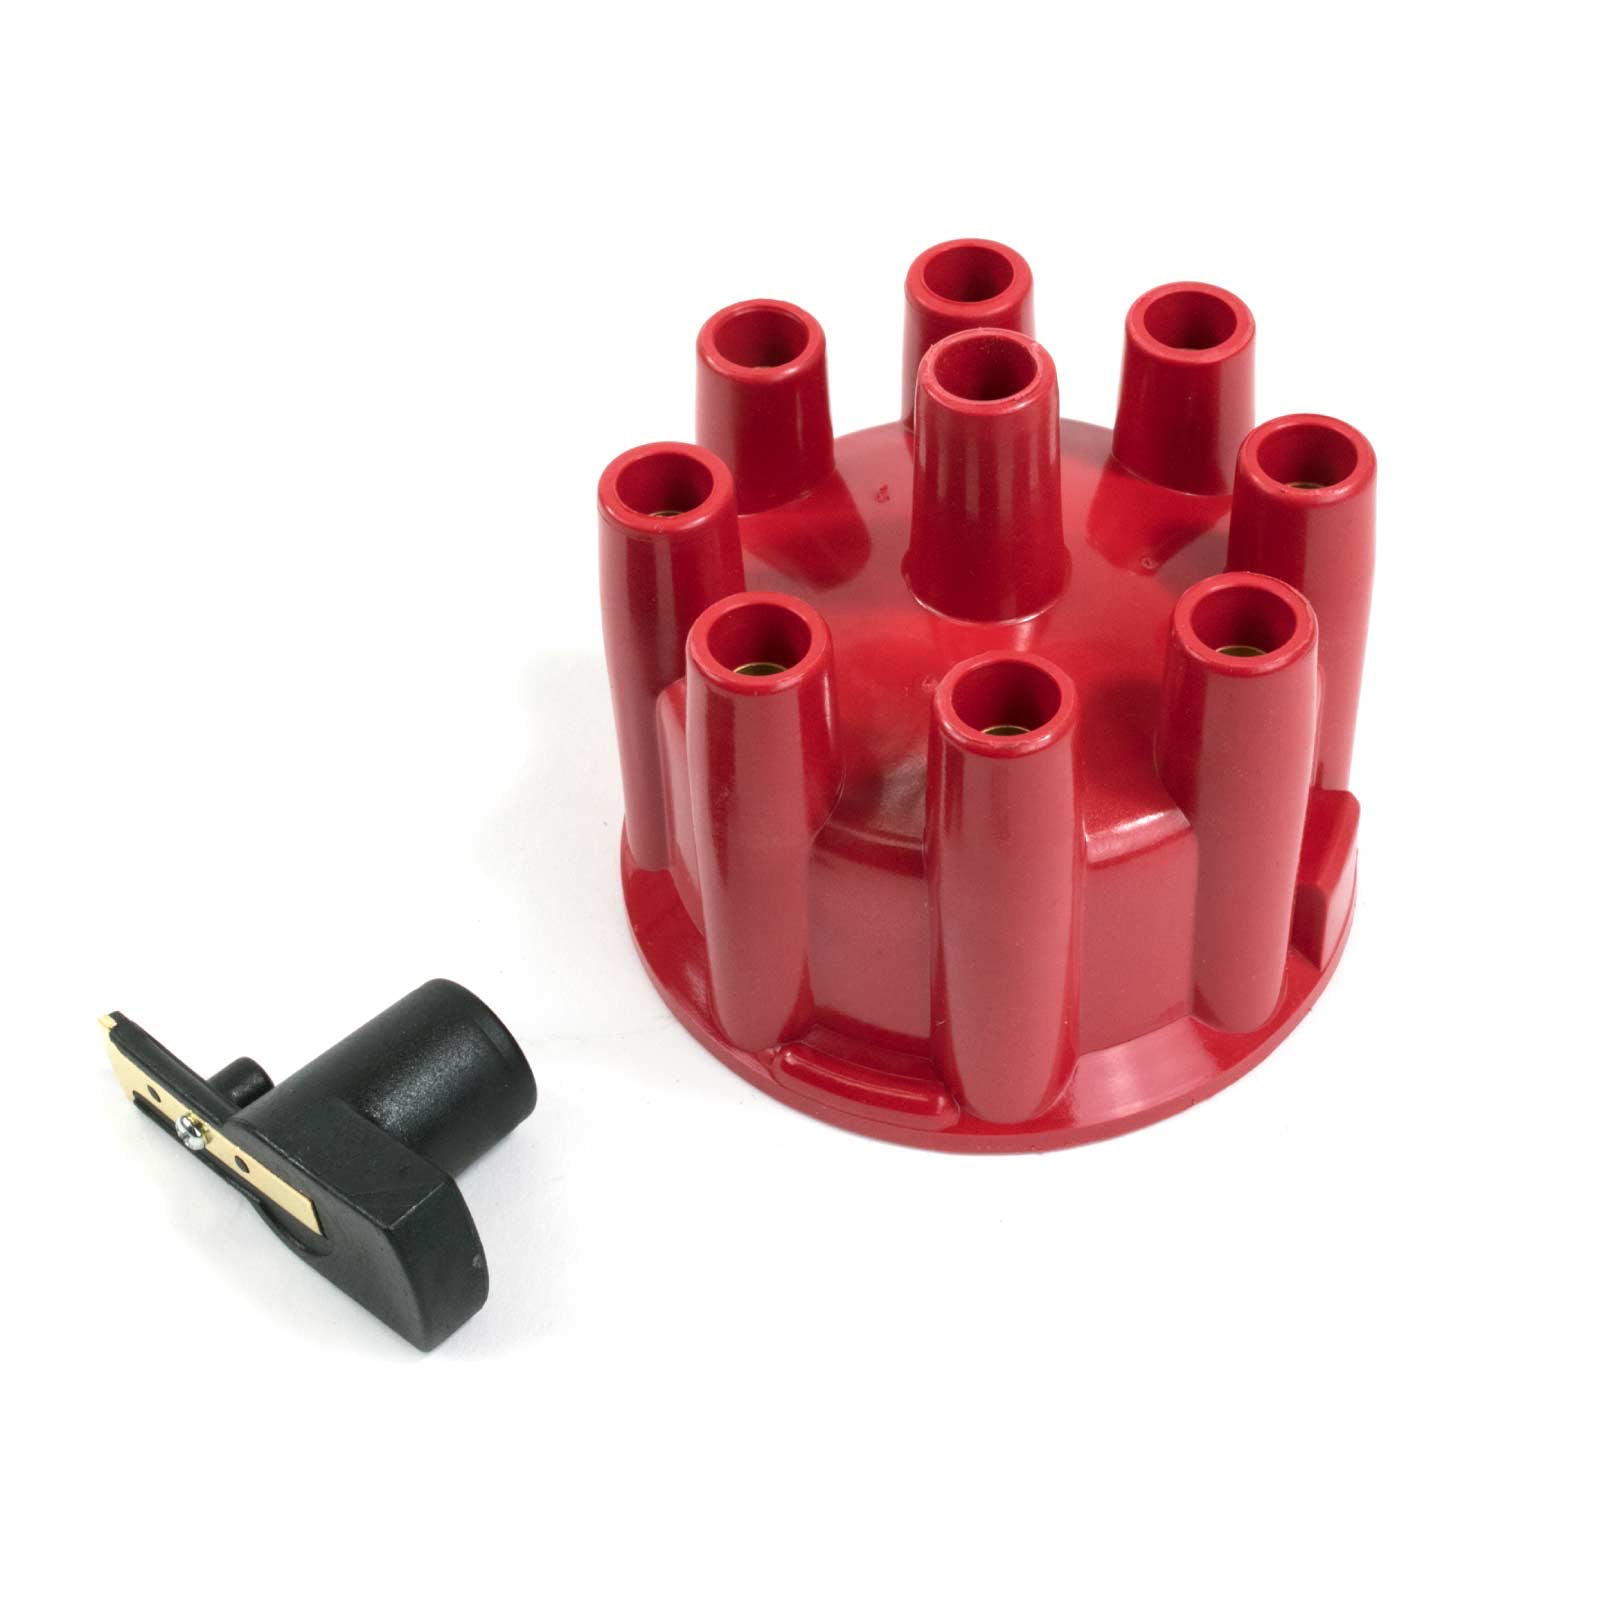 Top Street Performance JM6972R Pro Billet Ready To Run Distributor Cap and Rotor Kit Red